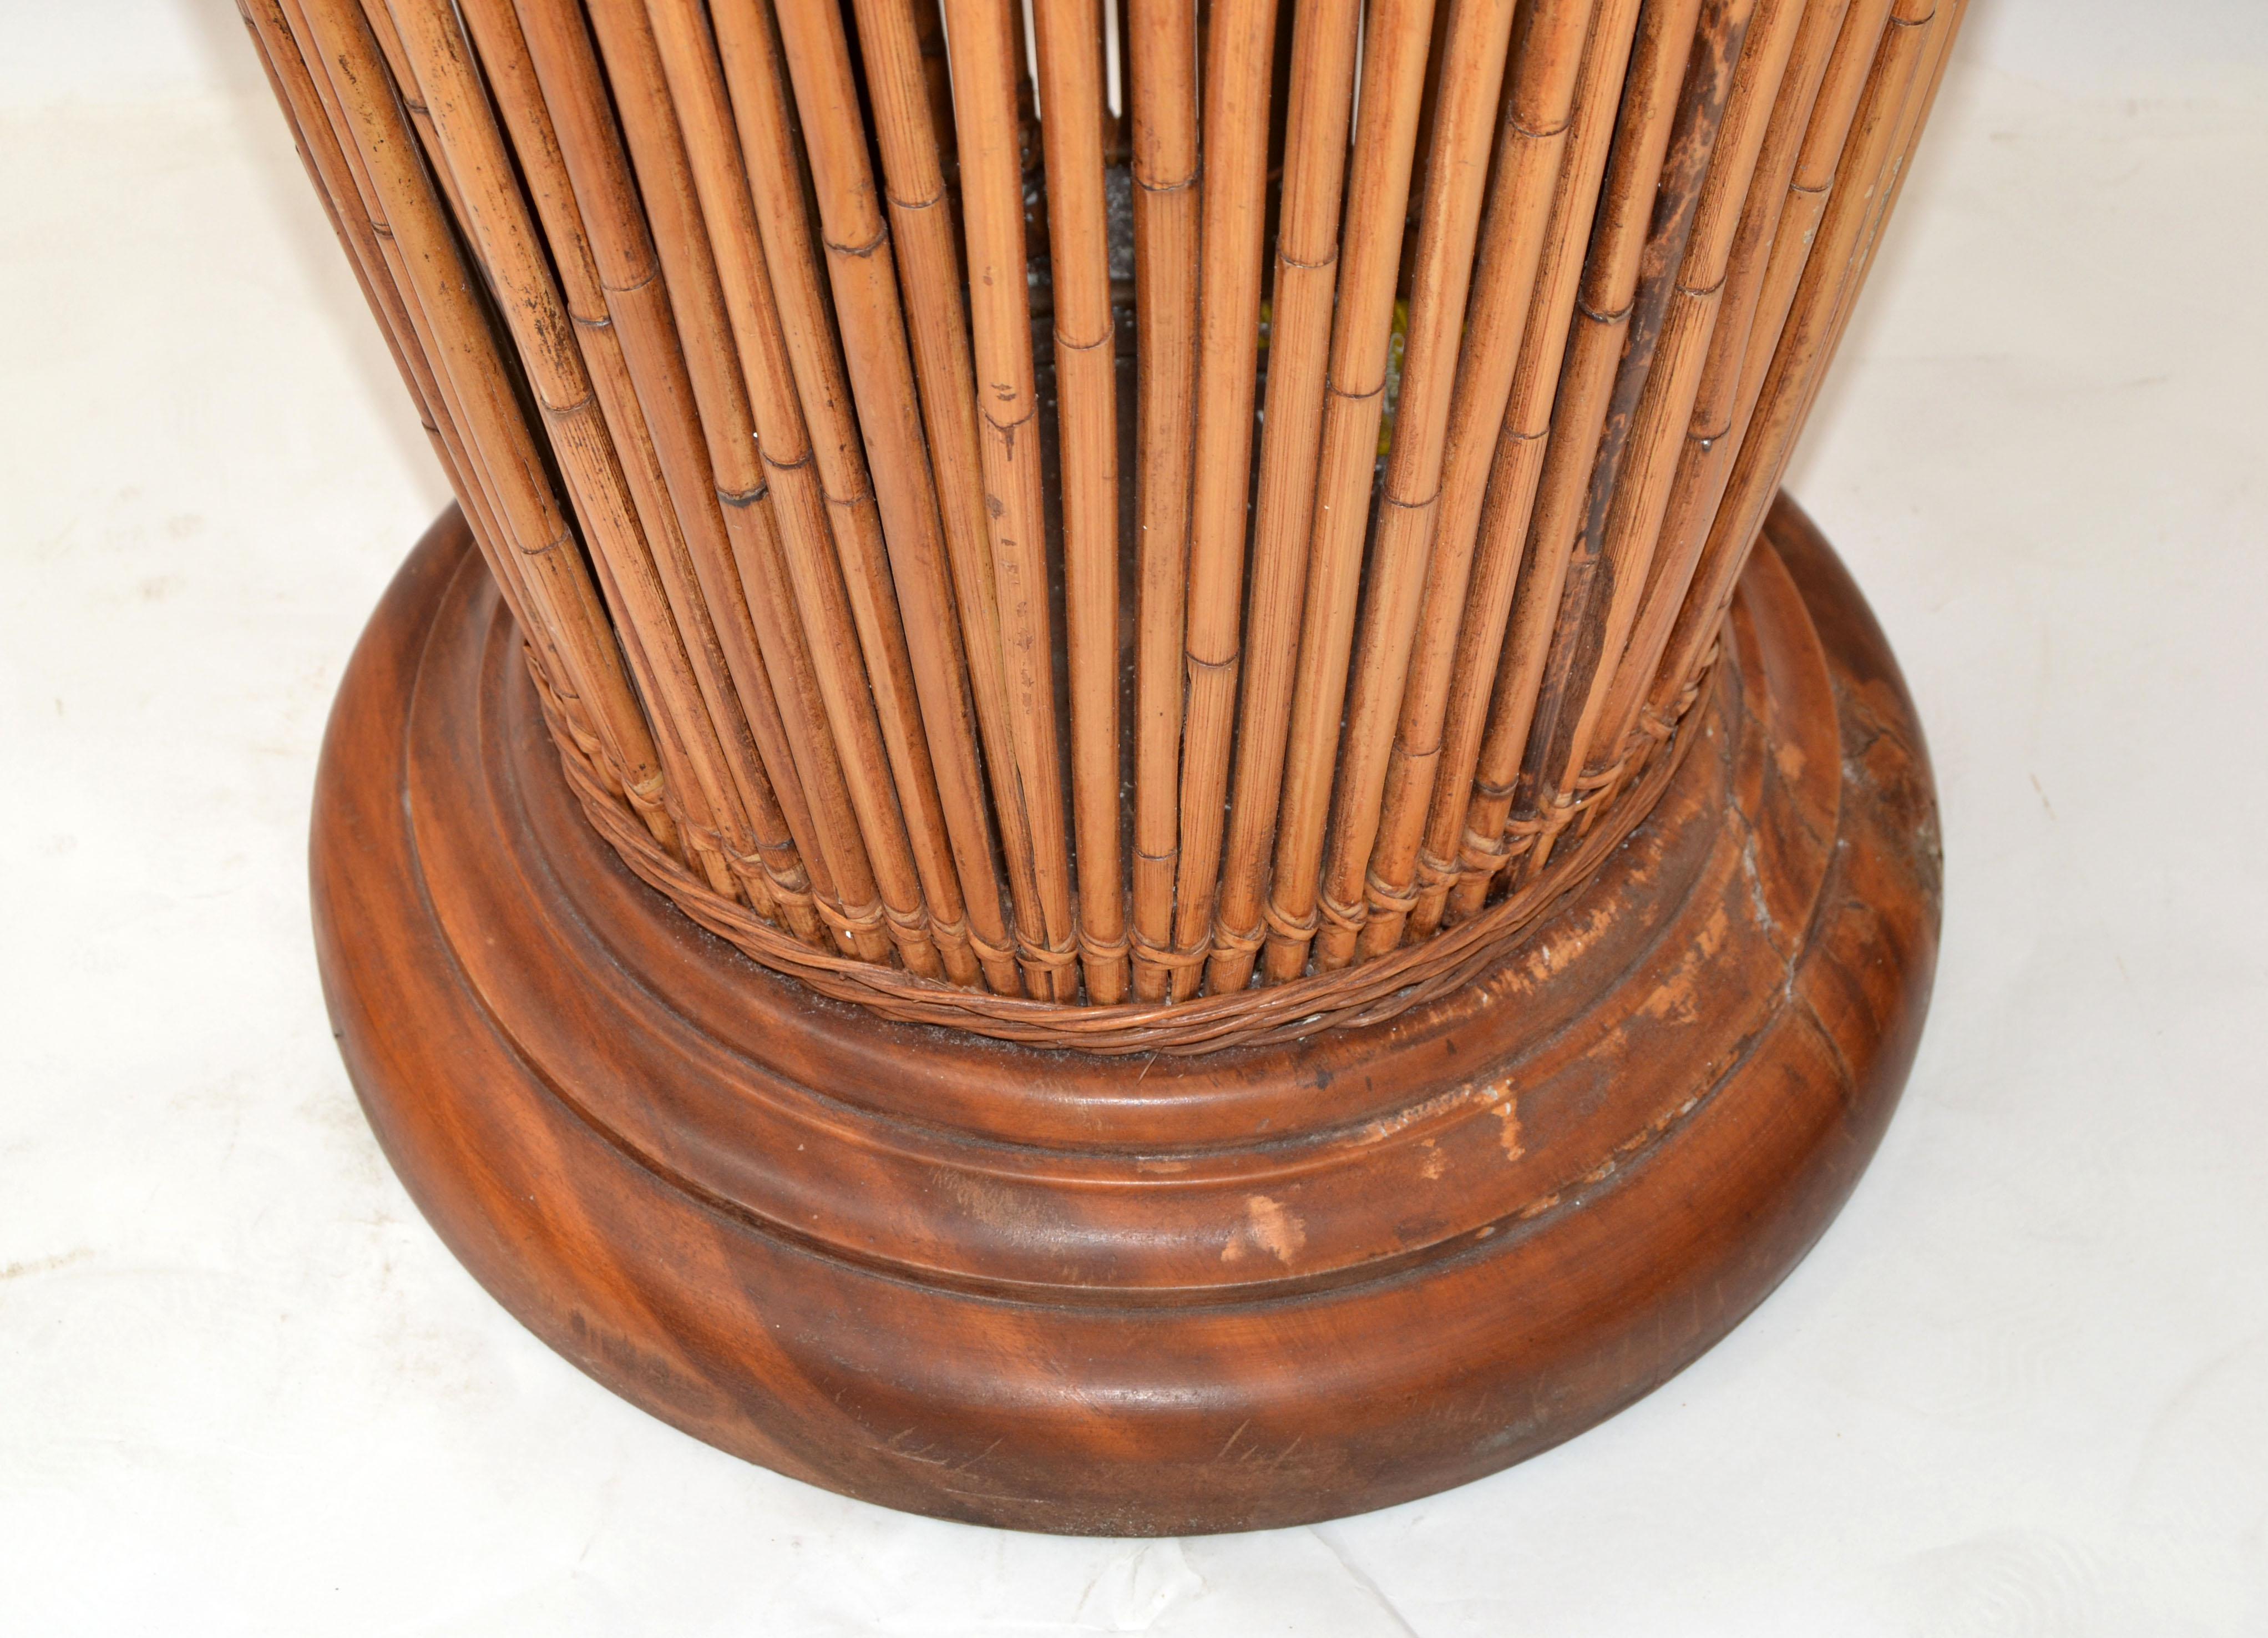 Monumental 6 Feet Mid-Century Modern Handcrafted Bamboo Brass & Cane Floor Vase For Sale 5